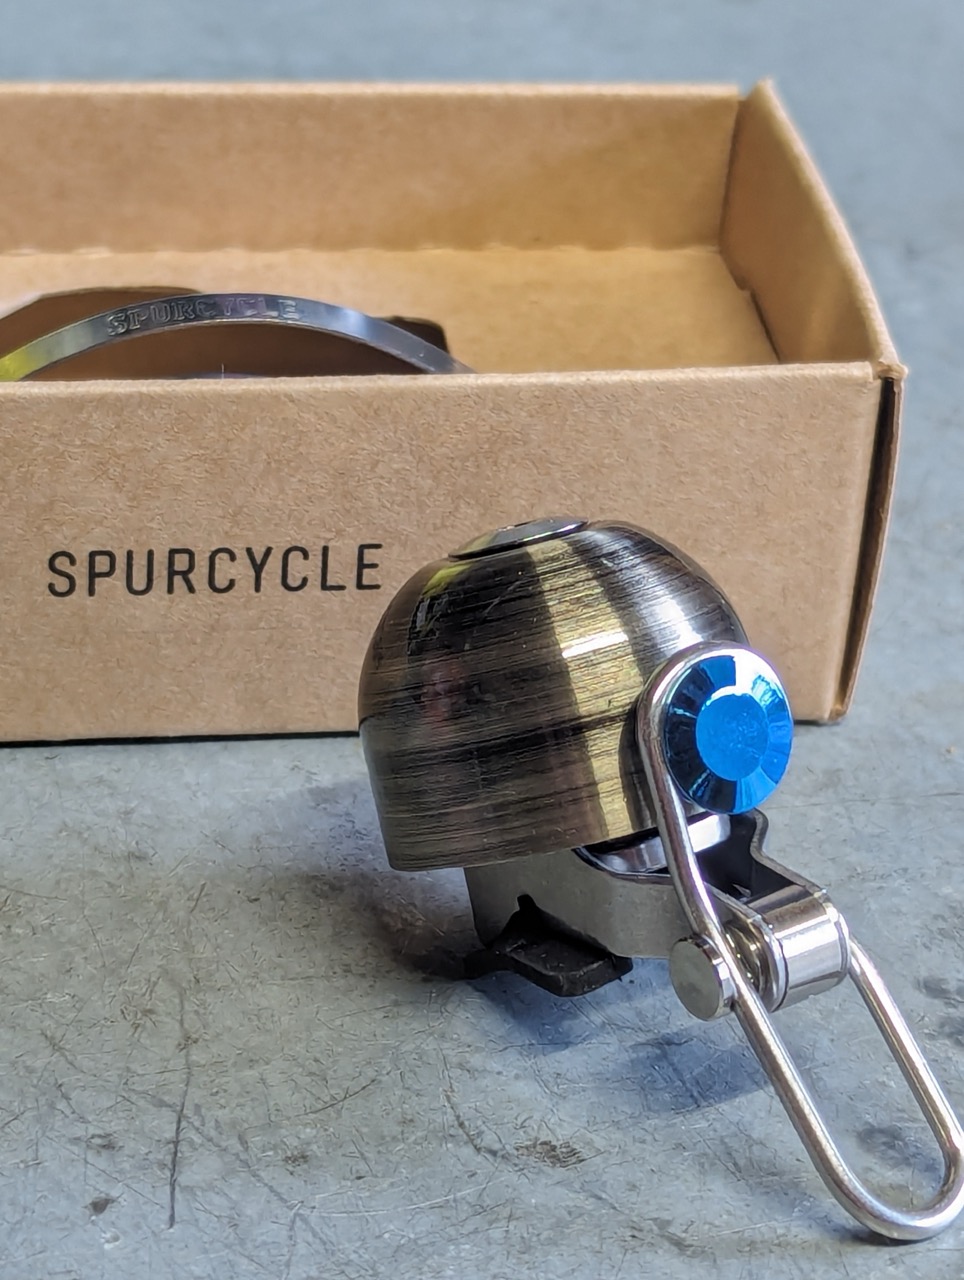 First Impressions Haro Saguaro 1 Spurcycle and box